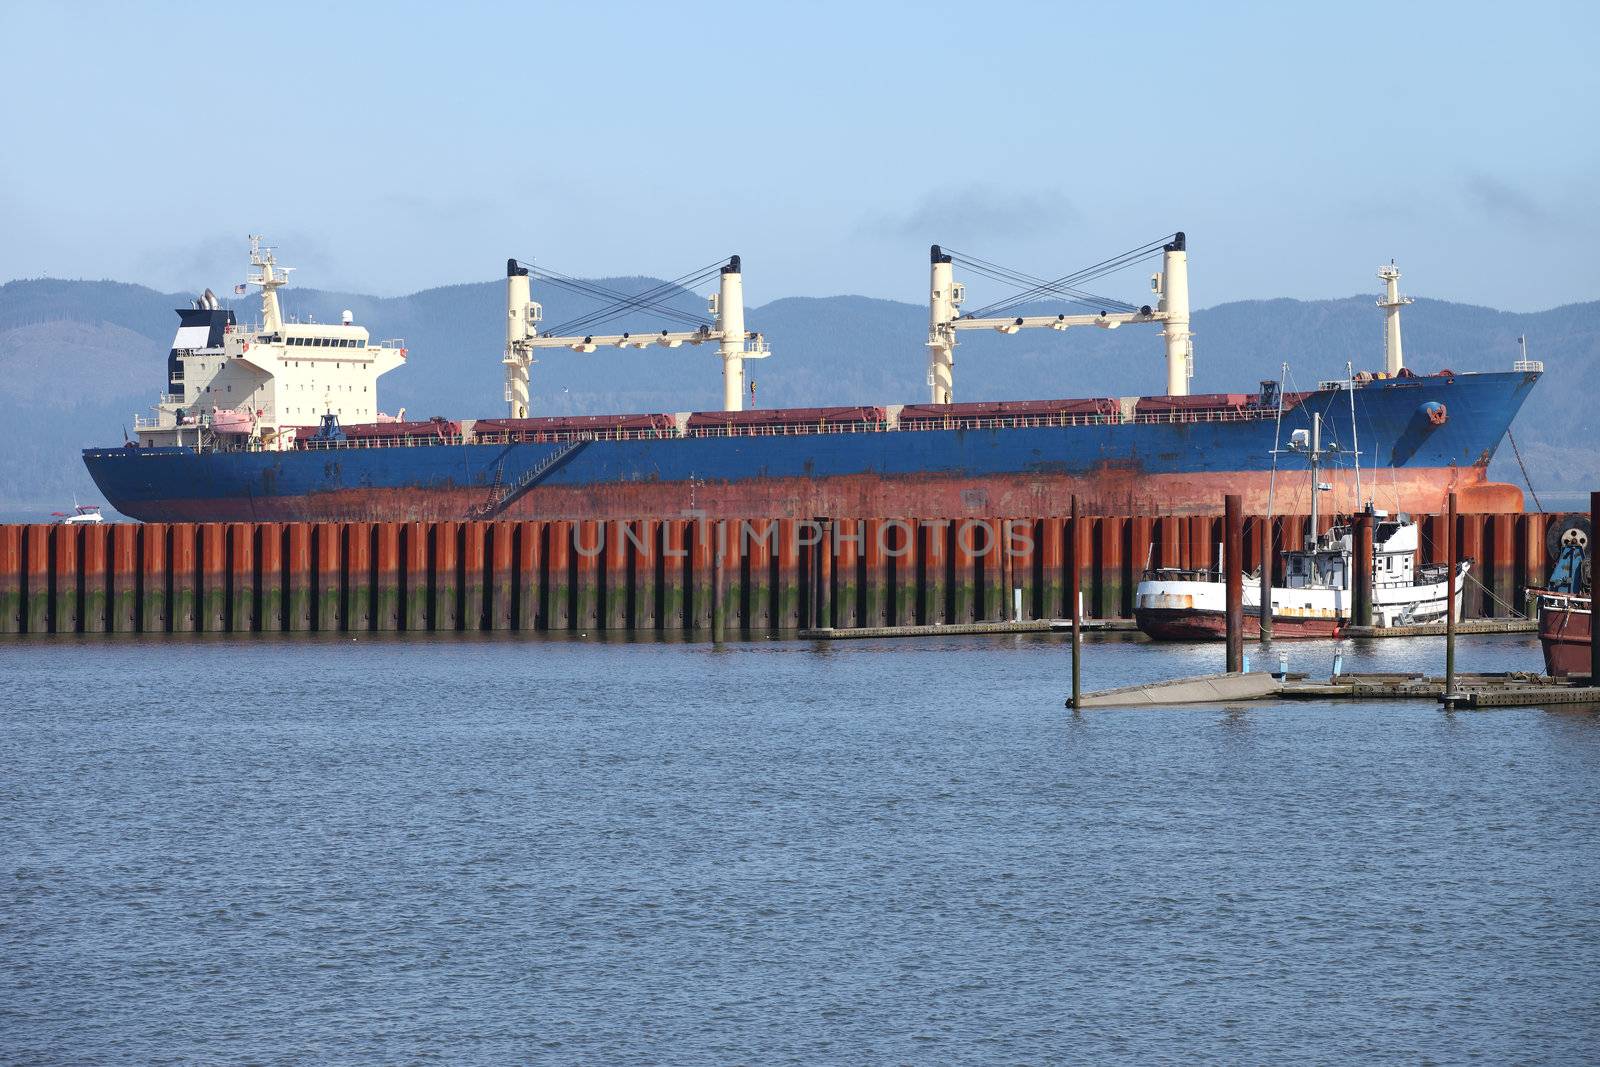 A large cargo ship anchored in the Astoria bay in the early morning.